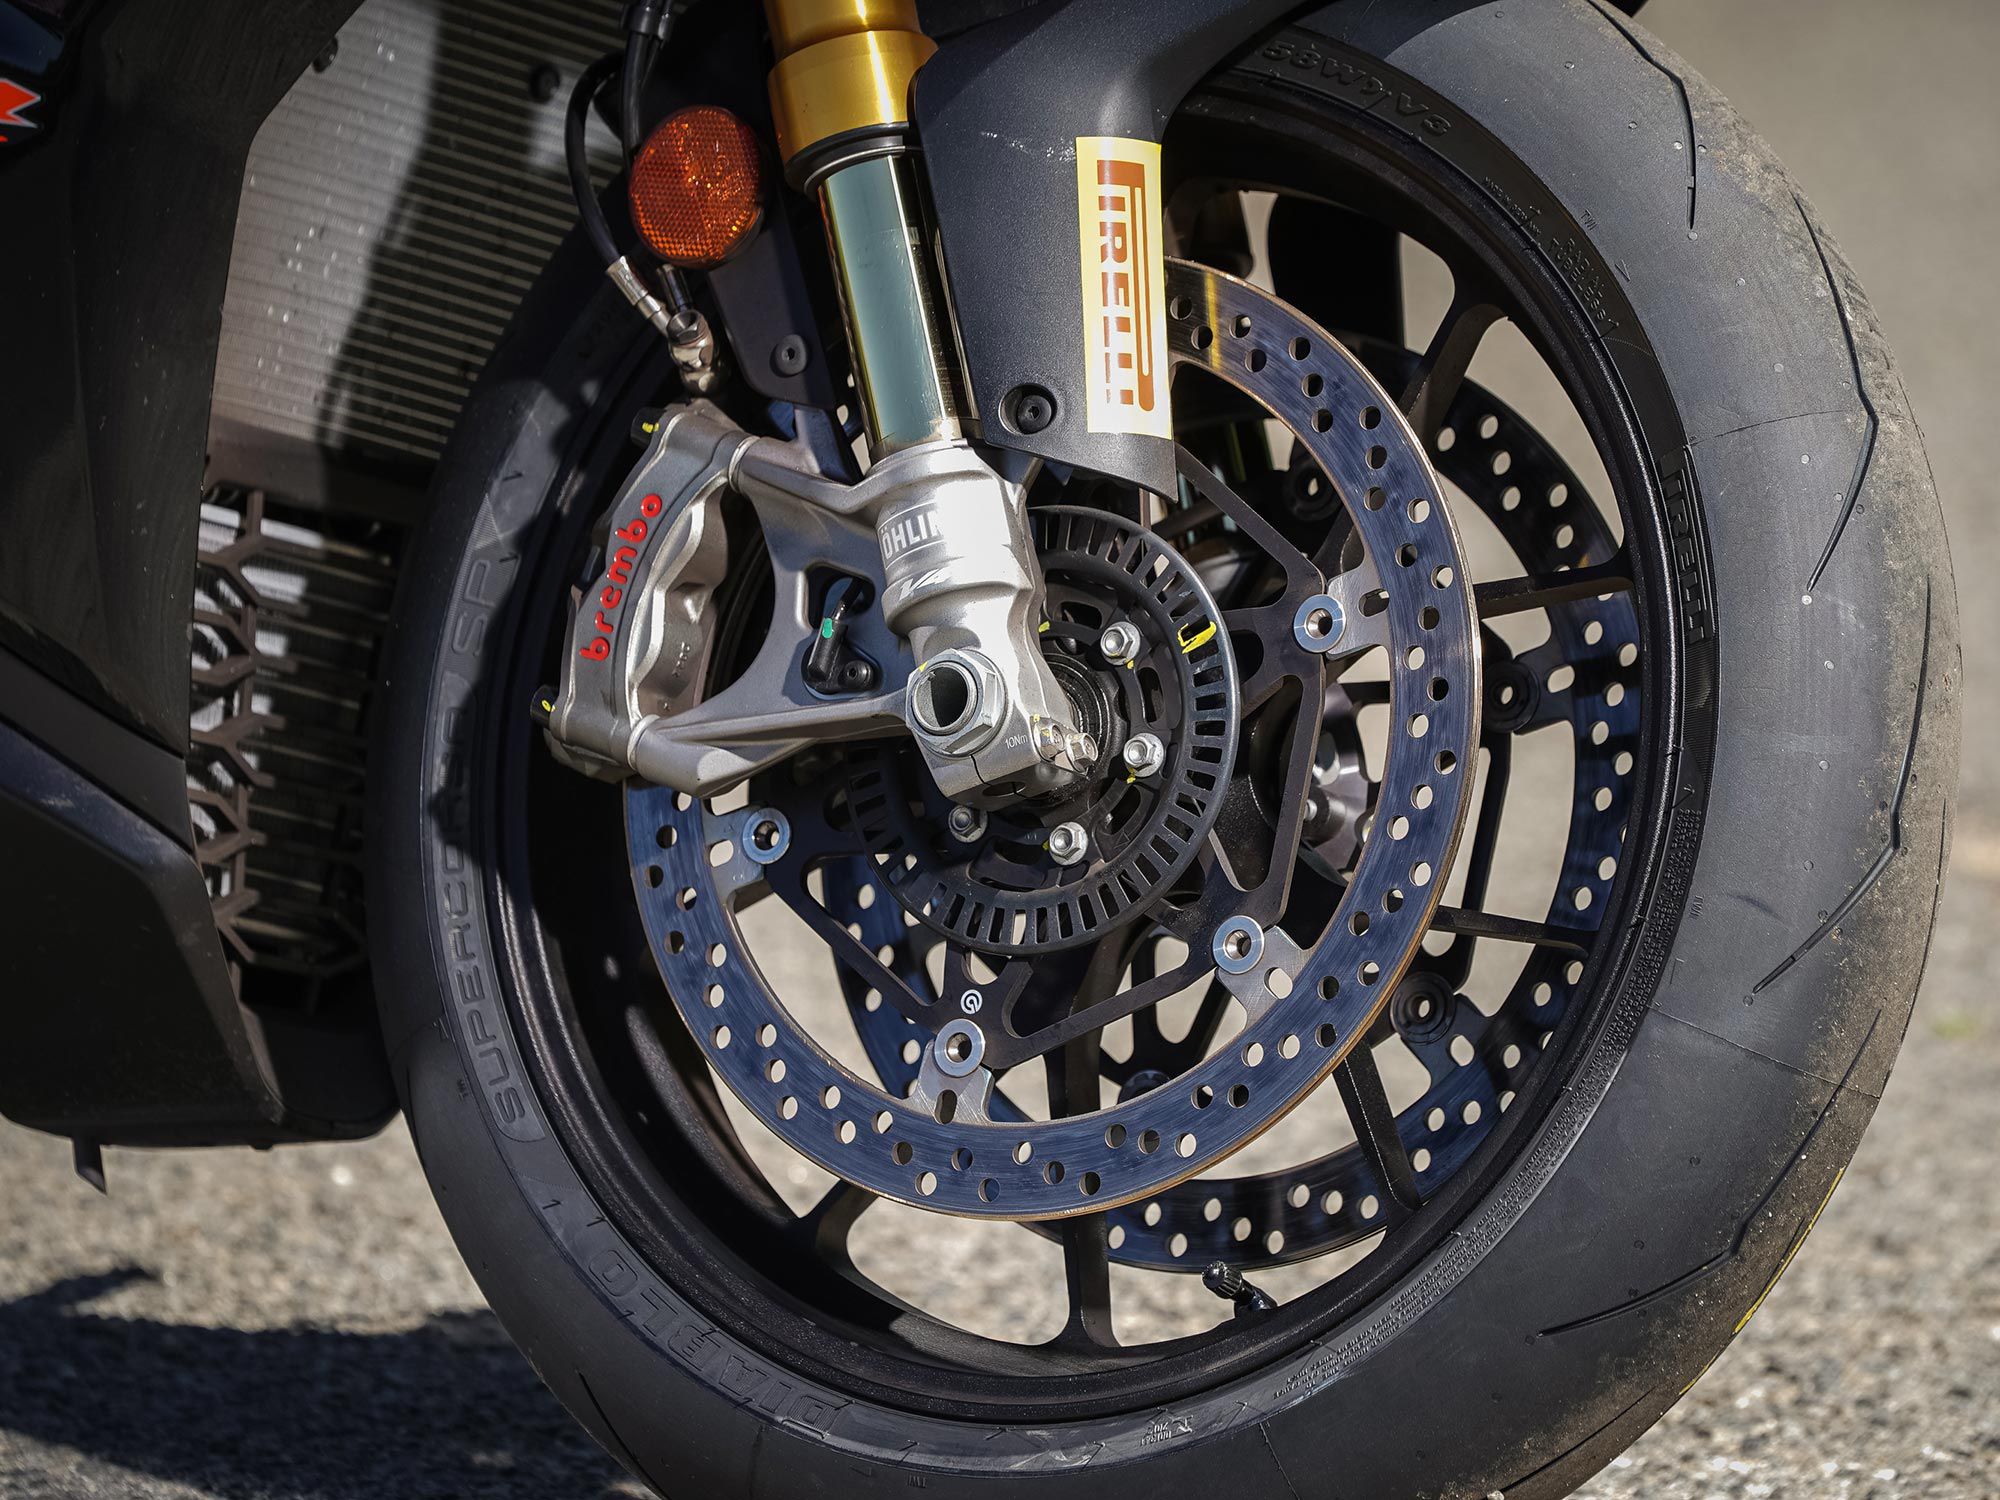 The RSV4 Factory includes semi-active suspension from Öhlins and forged alloy wheels for an $7,000 upcharge.